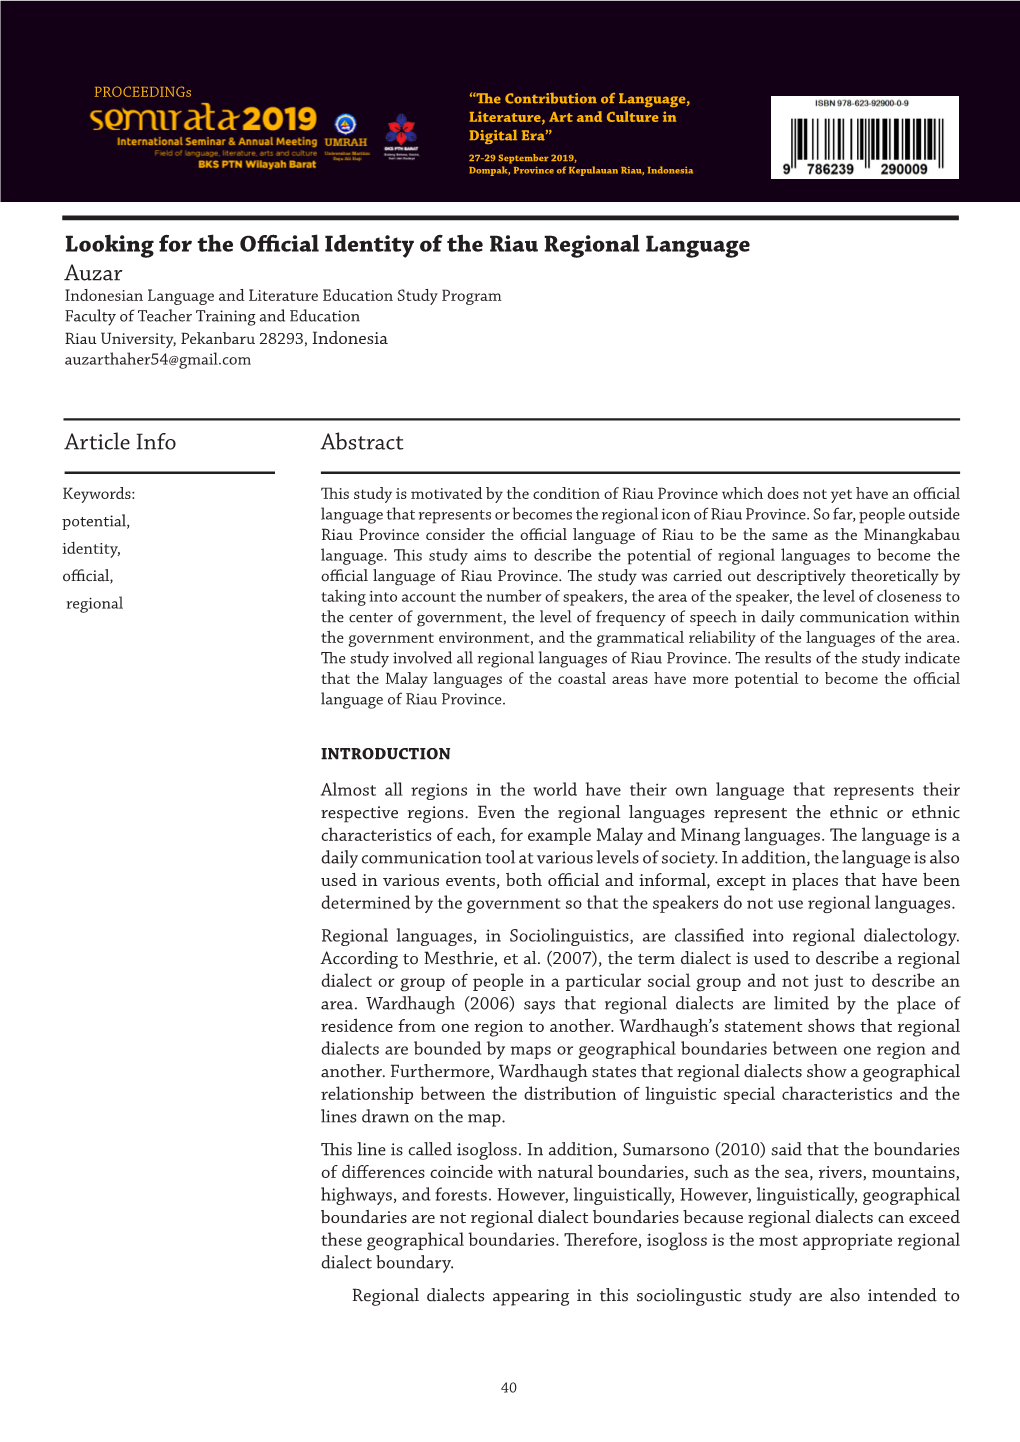 Article Info Abstract Looking for the Official Identity of the Riau Regional Language Auzar